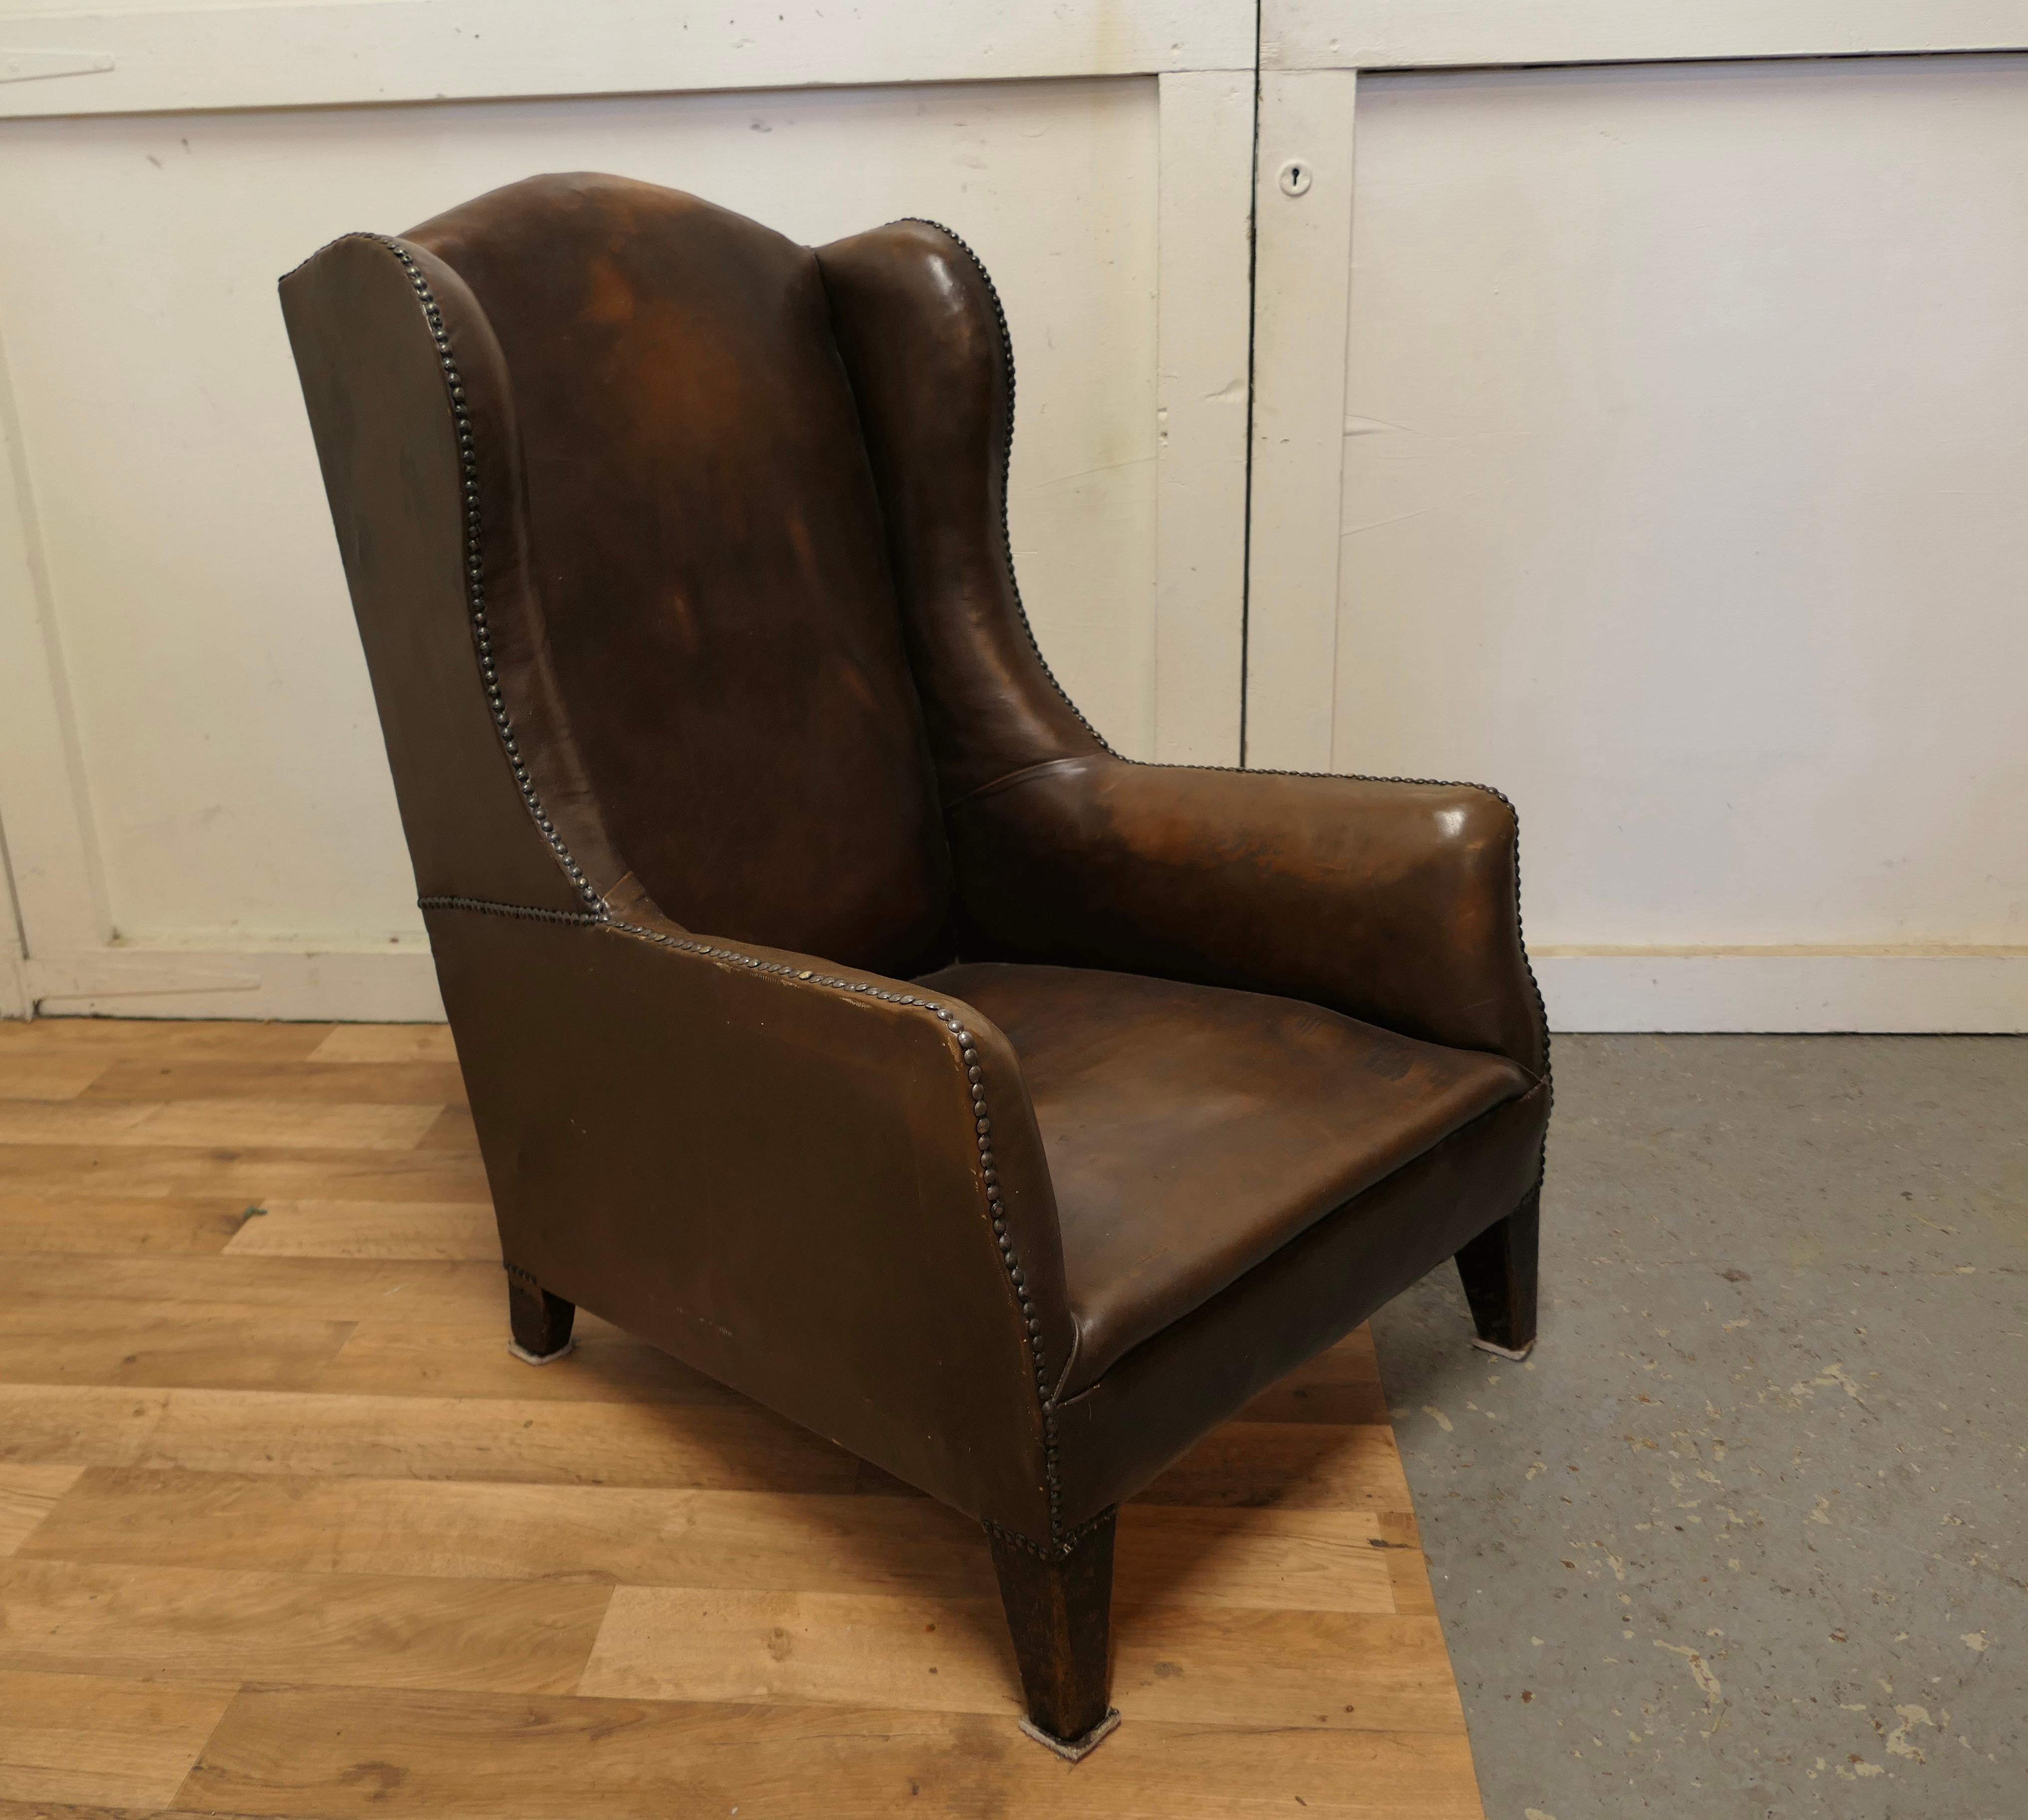 French Art Deco wing back chair, in dark brown leather 


The old leather hide is in good condition, it has a beautiful soft feel having been polished many times over the years and it has been well loved and well taken care of 
The chairs has